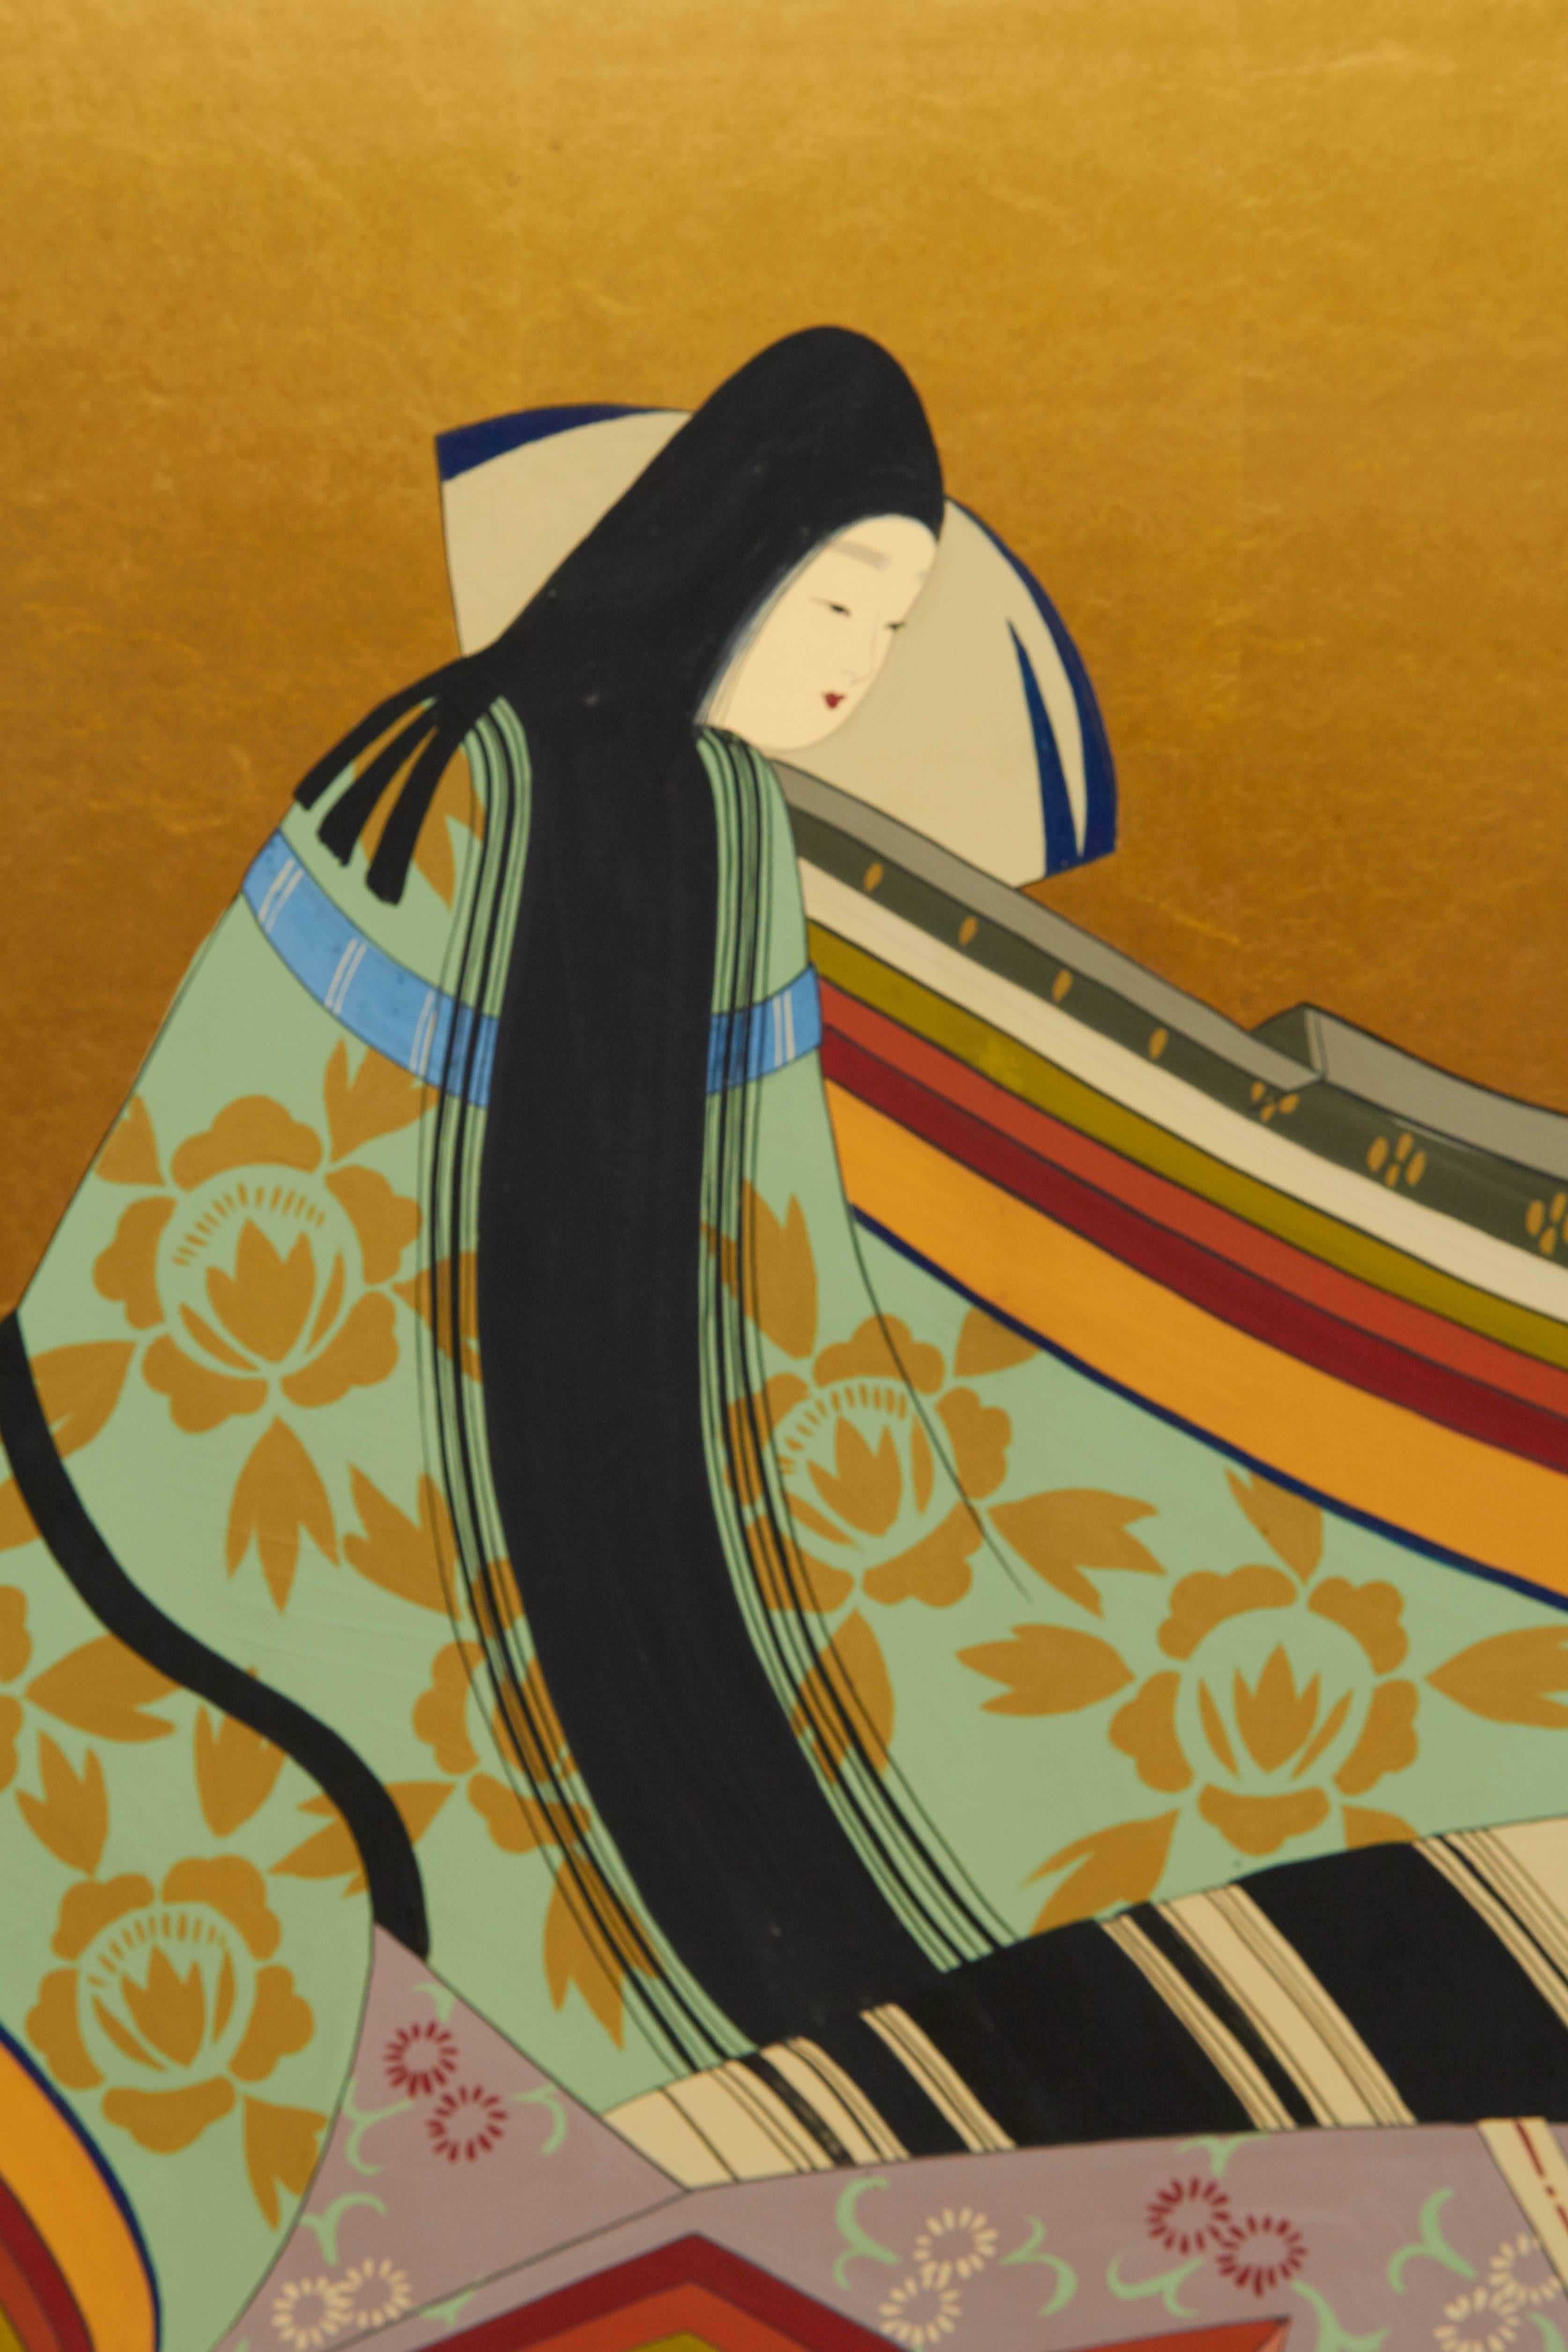 Japanese four-panel screen, produced circa 1940s, within the Showa period (1926-1989), depicting the elegantly dressed Lady Murasaki Shikibu, the author of “Tales of Genji” the first novel written in the 11th century. Her attire comprised of various